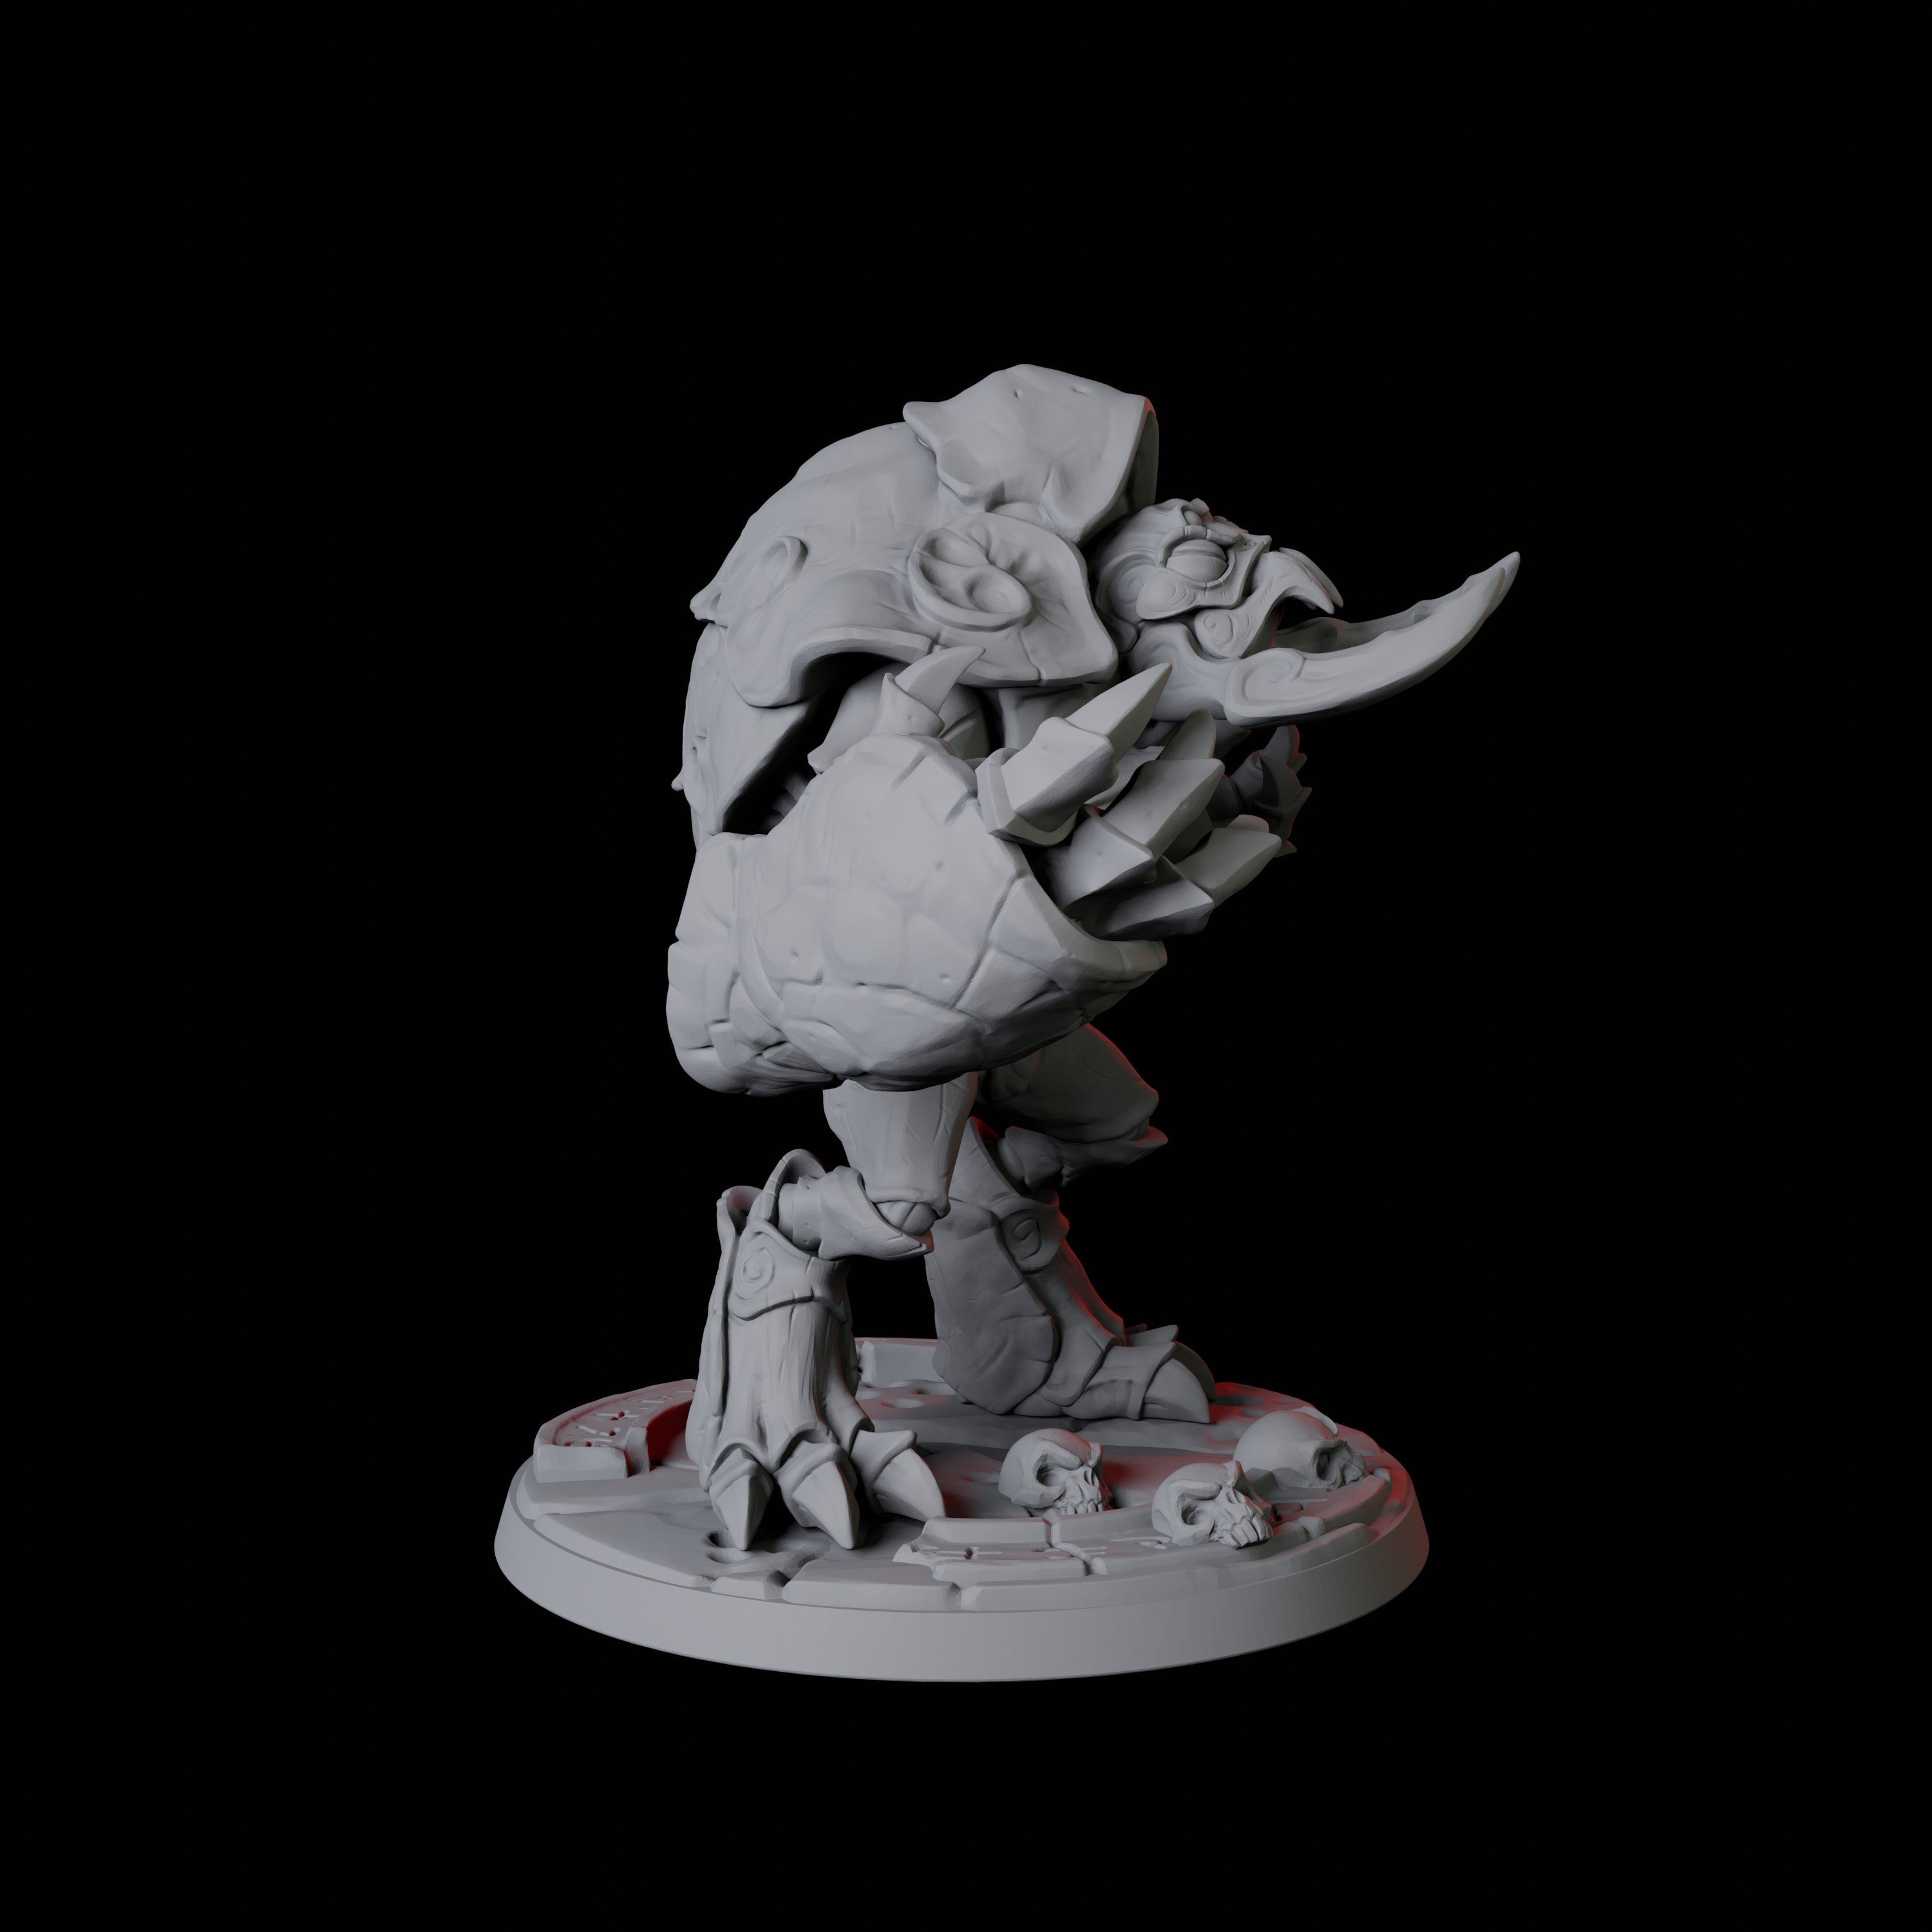 Four Umber Hulk Miniatures for Dungeons and Dragons - Myth Forged